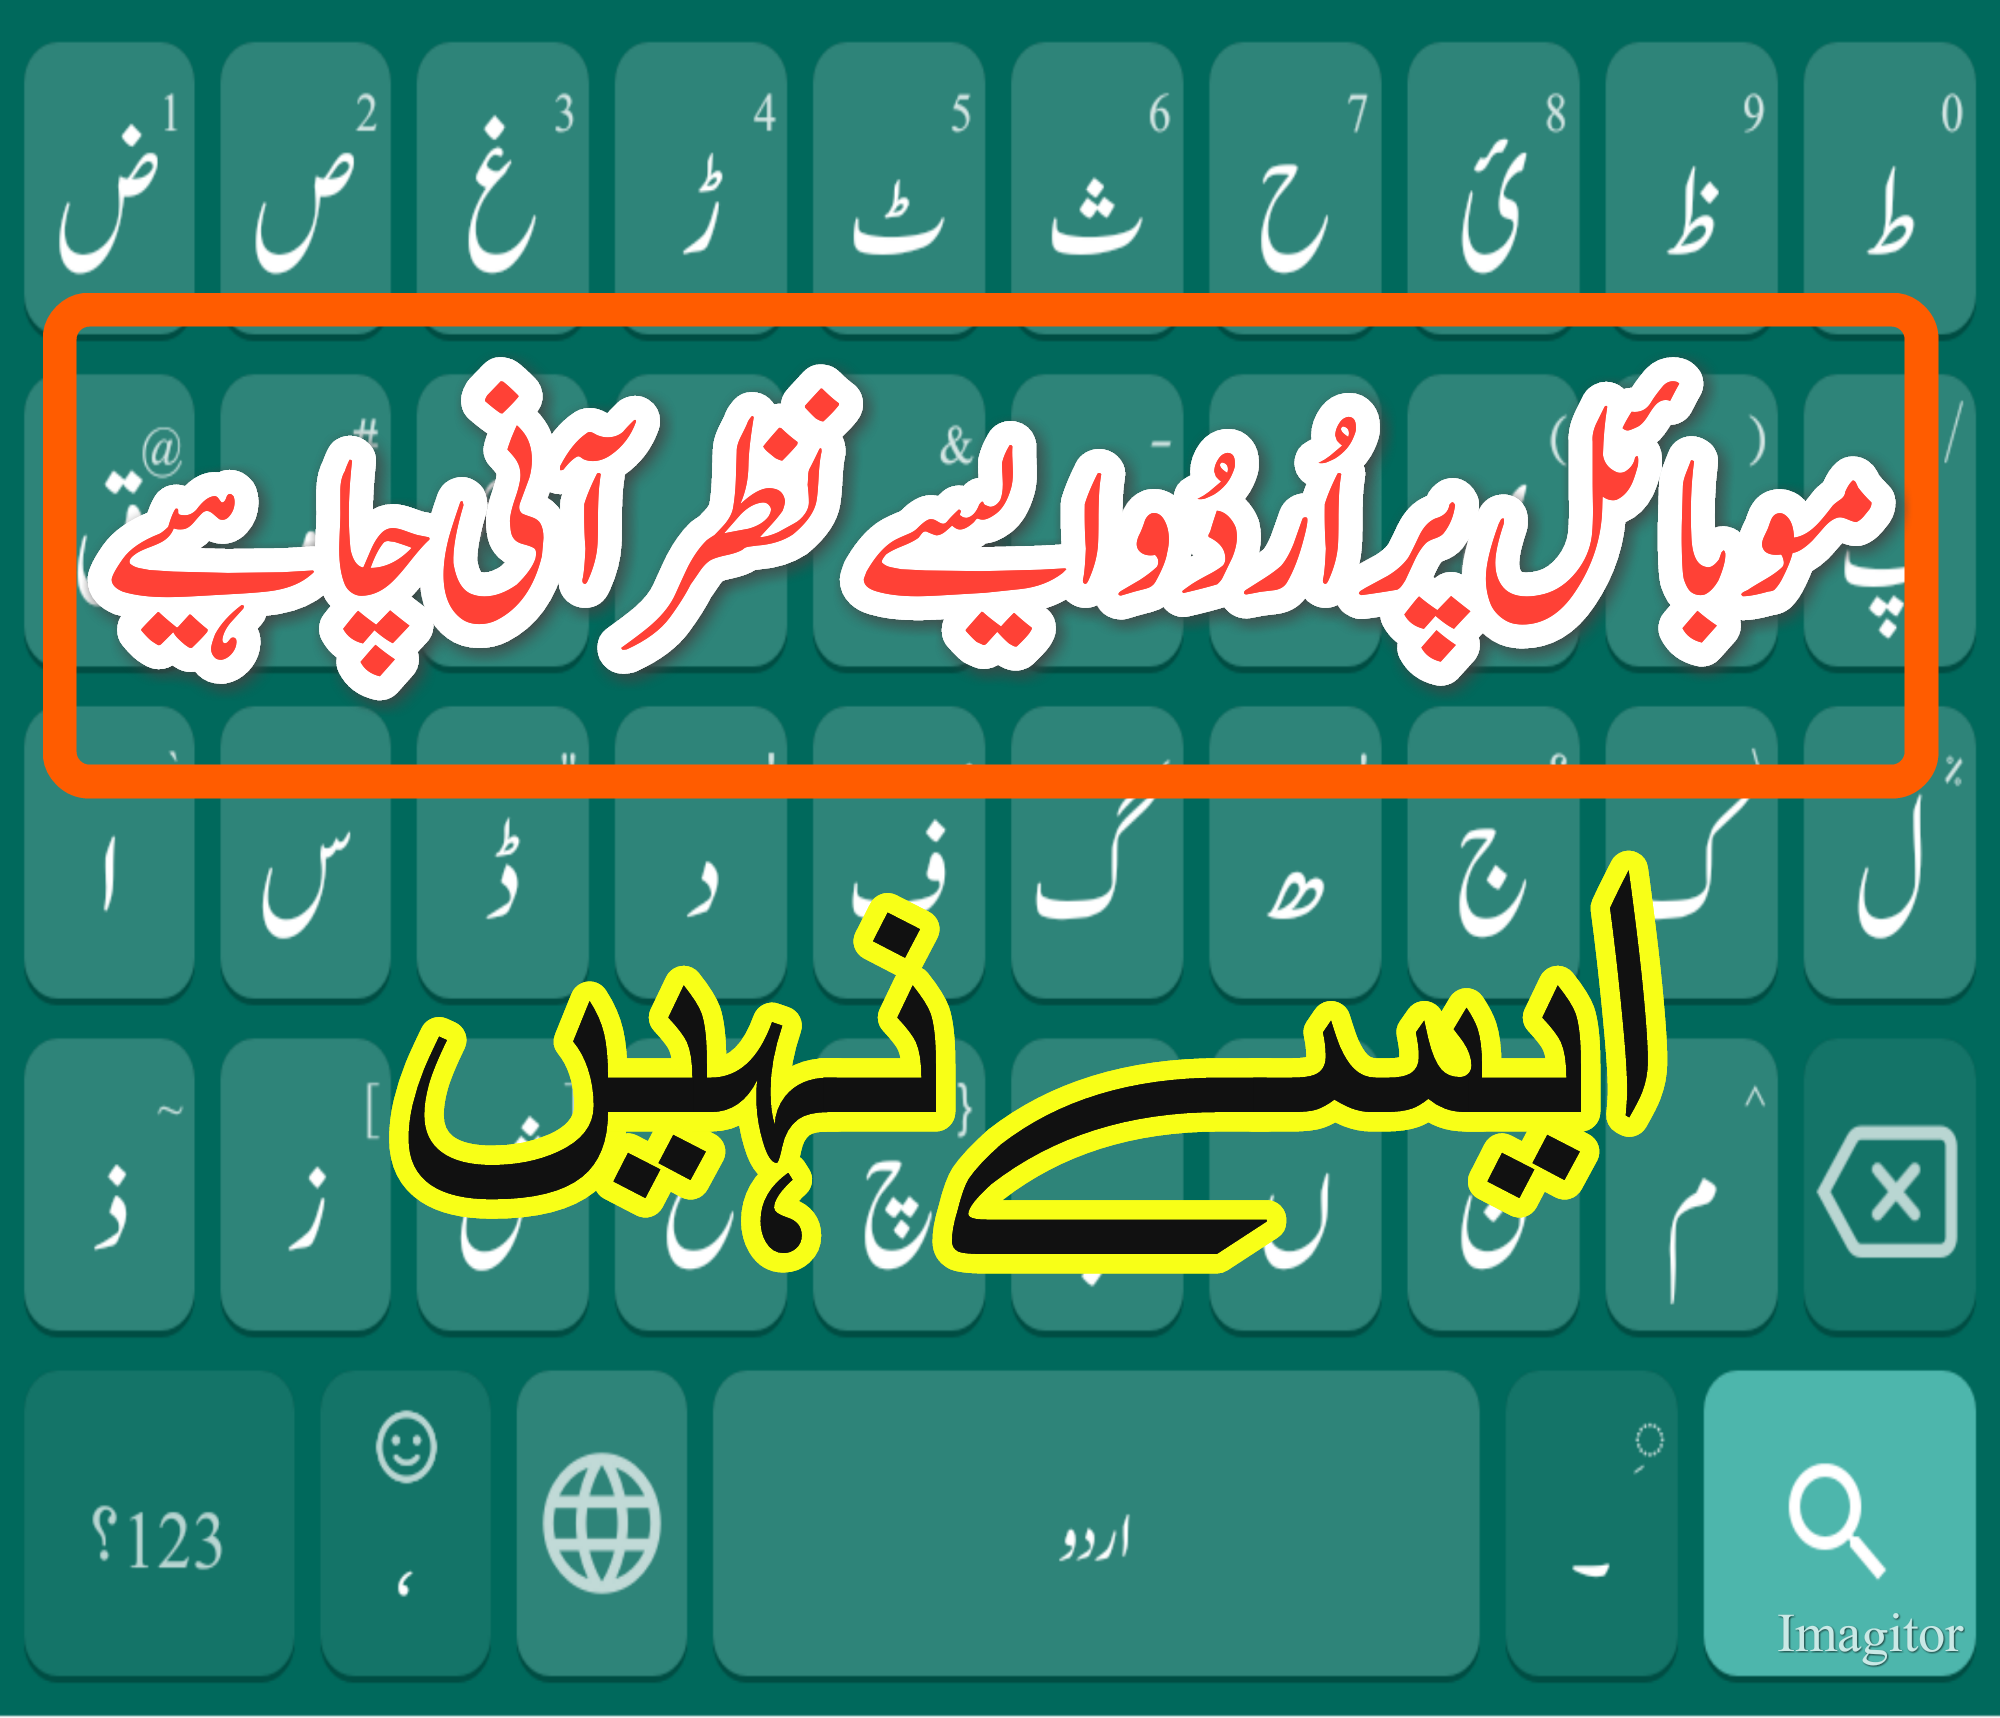 urdu fonts for android phone